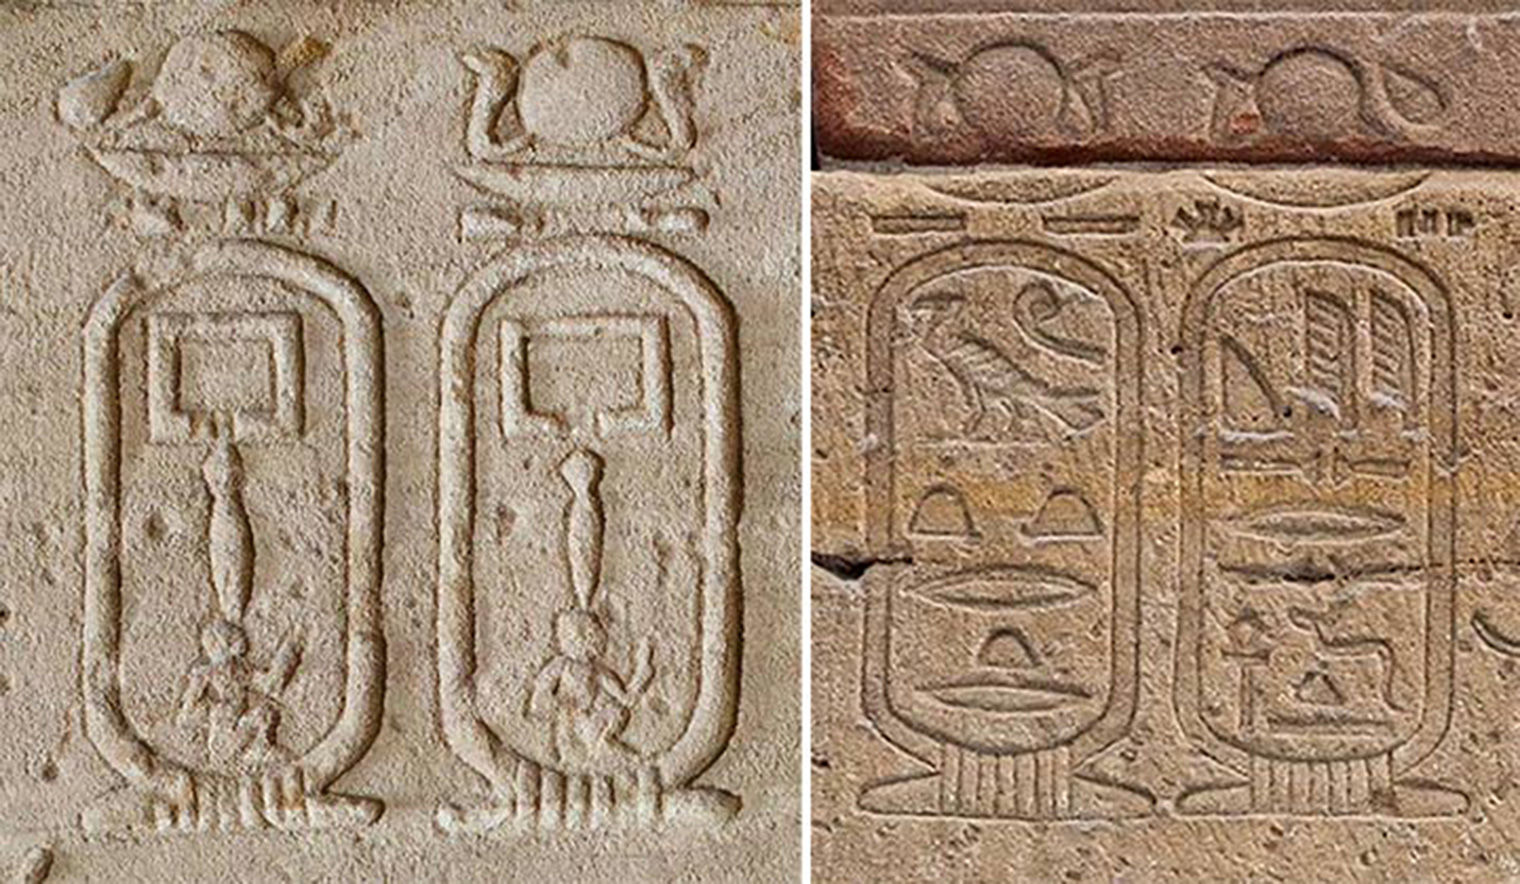 A composite of two images. On the Left: Two cartouches reading "Pharaoh" in raised relief. On the Right: Two cartouches calling Augustus Autokrator (the Greek word for "Emperor," on the left) and Kaisaros (the Greek version of the title "Caesar," on the right), in sunk relief